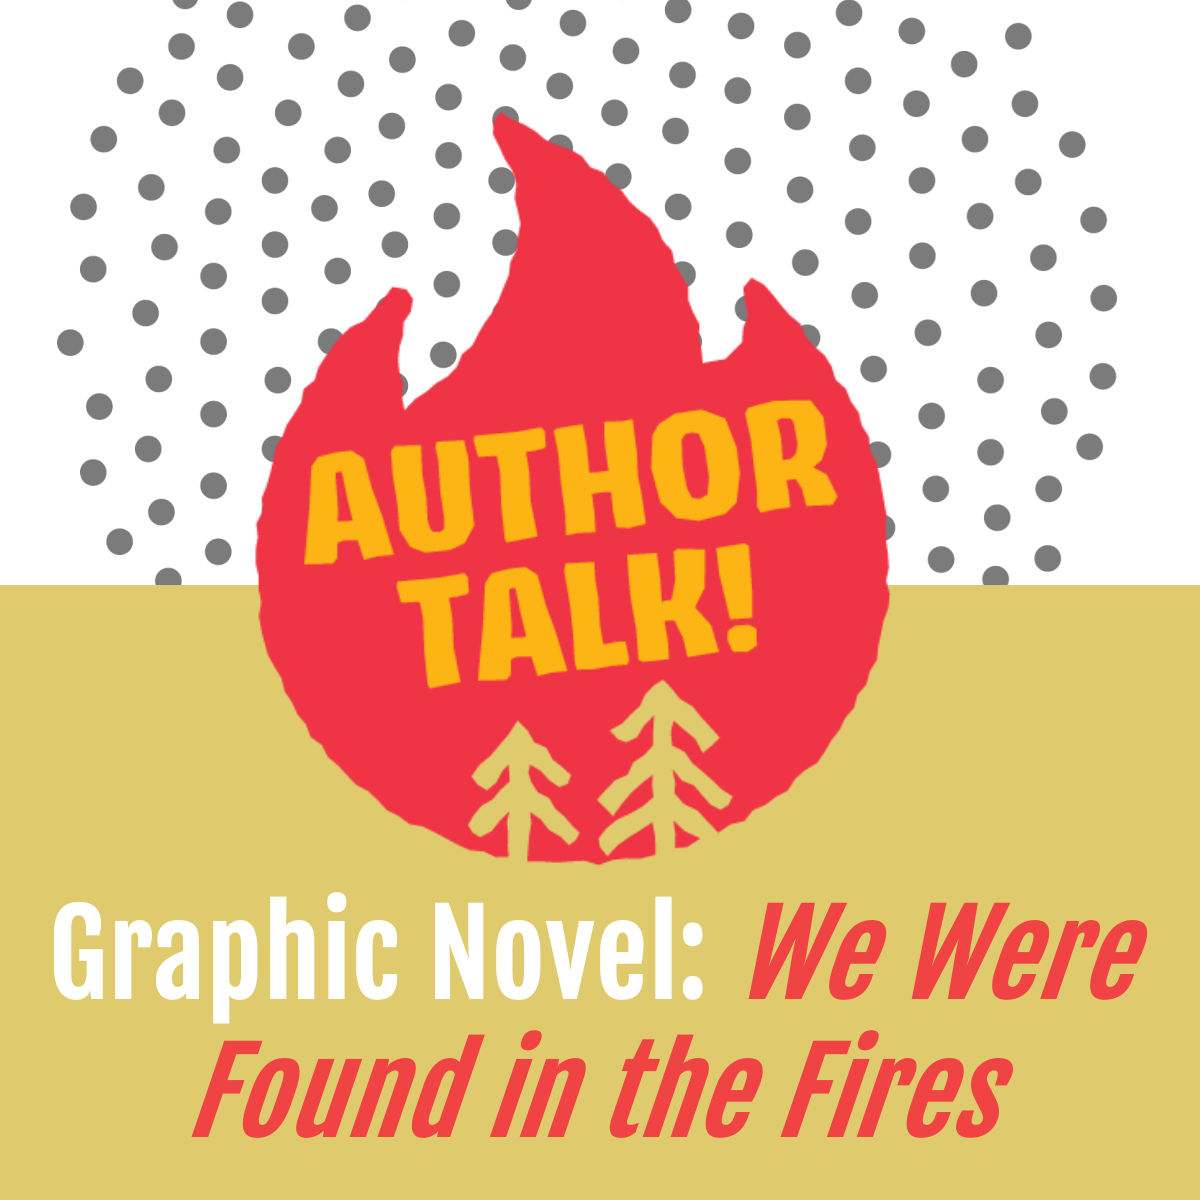 Author Talk! Graphic Novel: We Were Found in the Fires